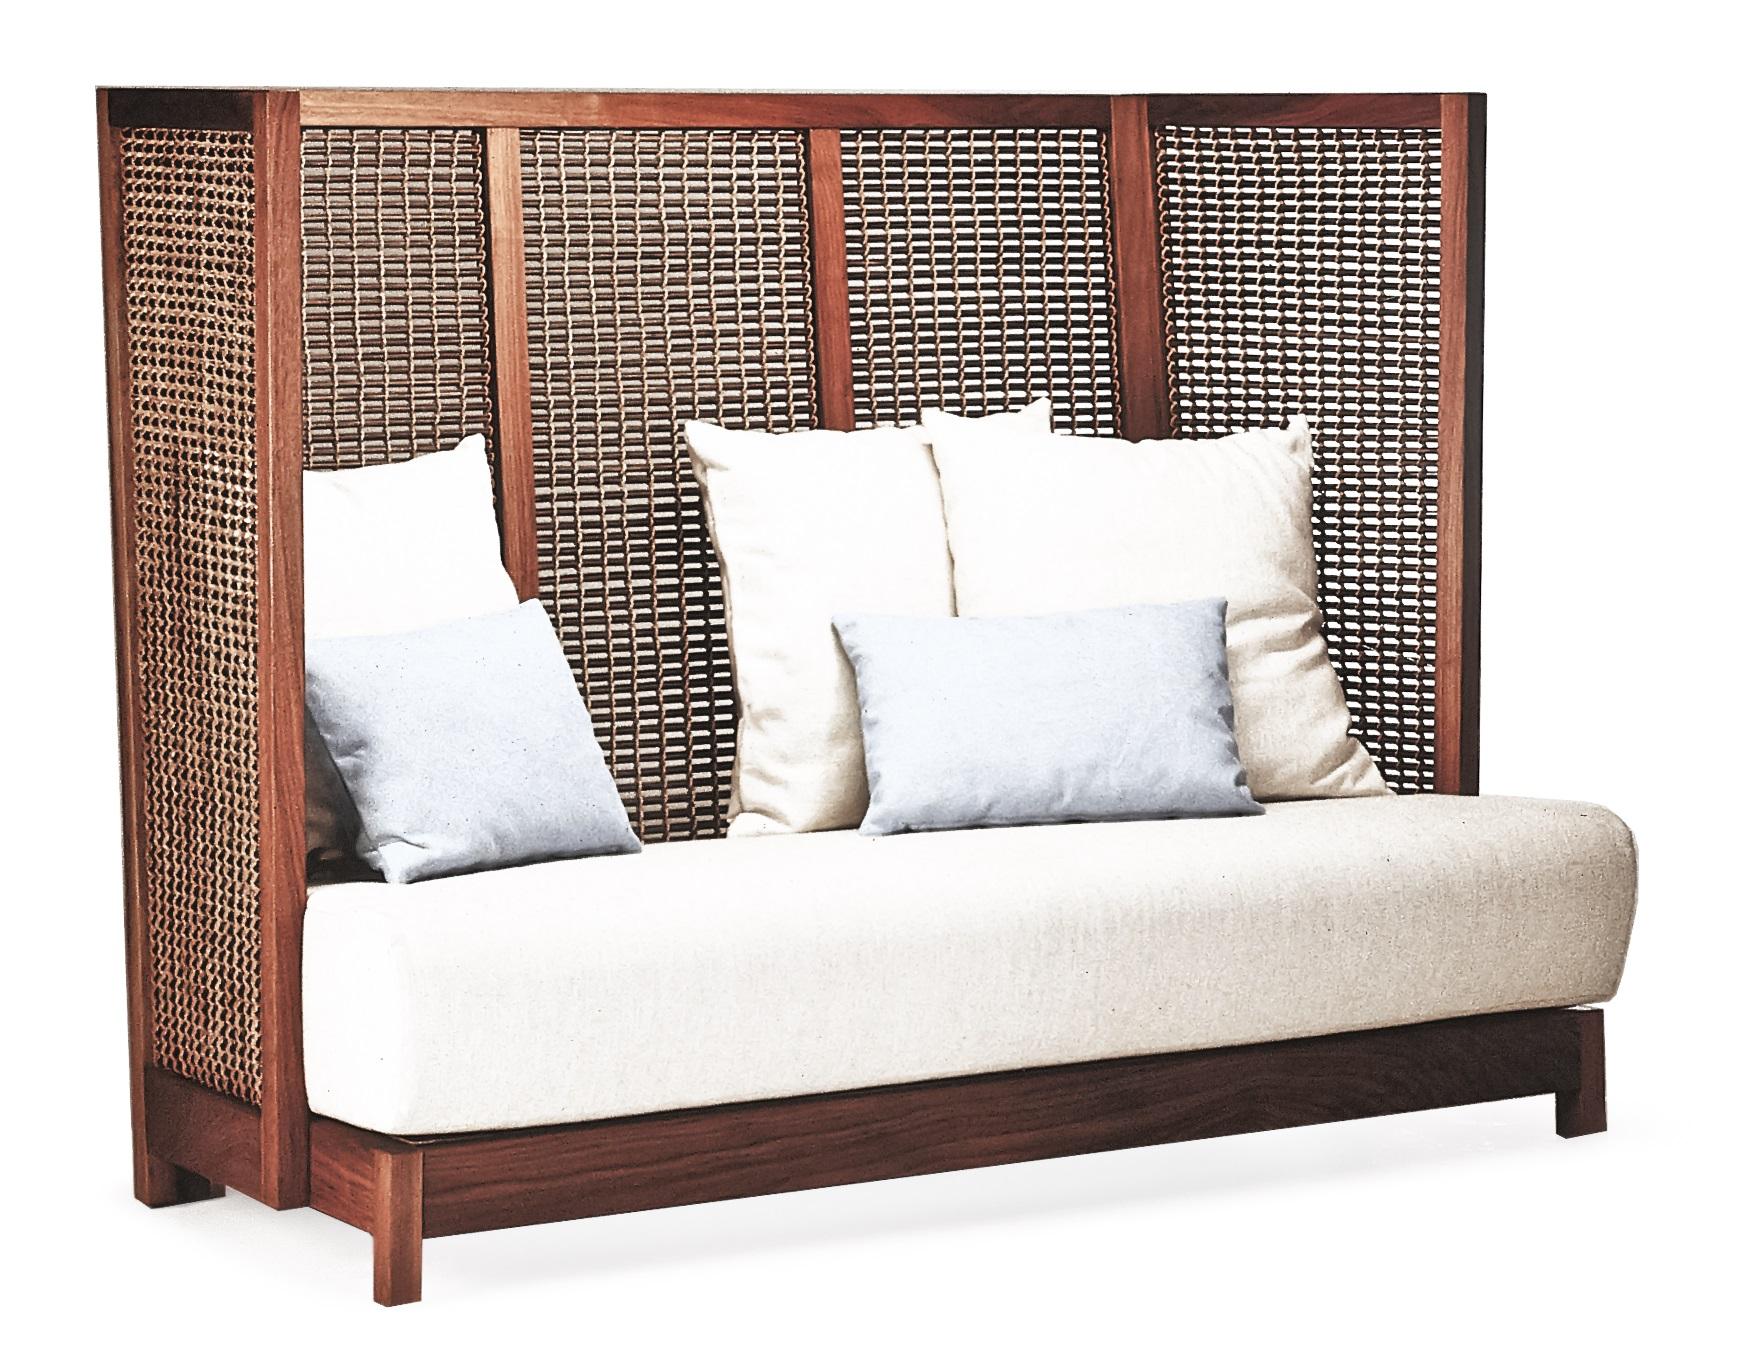 Maple highback Suzy Wong loveseat by Kenneth Cobonpue.
Materials: Abaca, rattan, maple. 
Also available in walnut.
Dimensions: 75 cm x 164.5 cm x height 122 cm

Woven panels create a feeling of intimacy as you and your guests indulge in